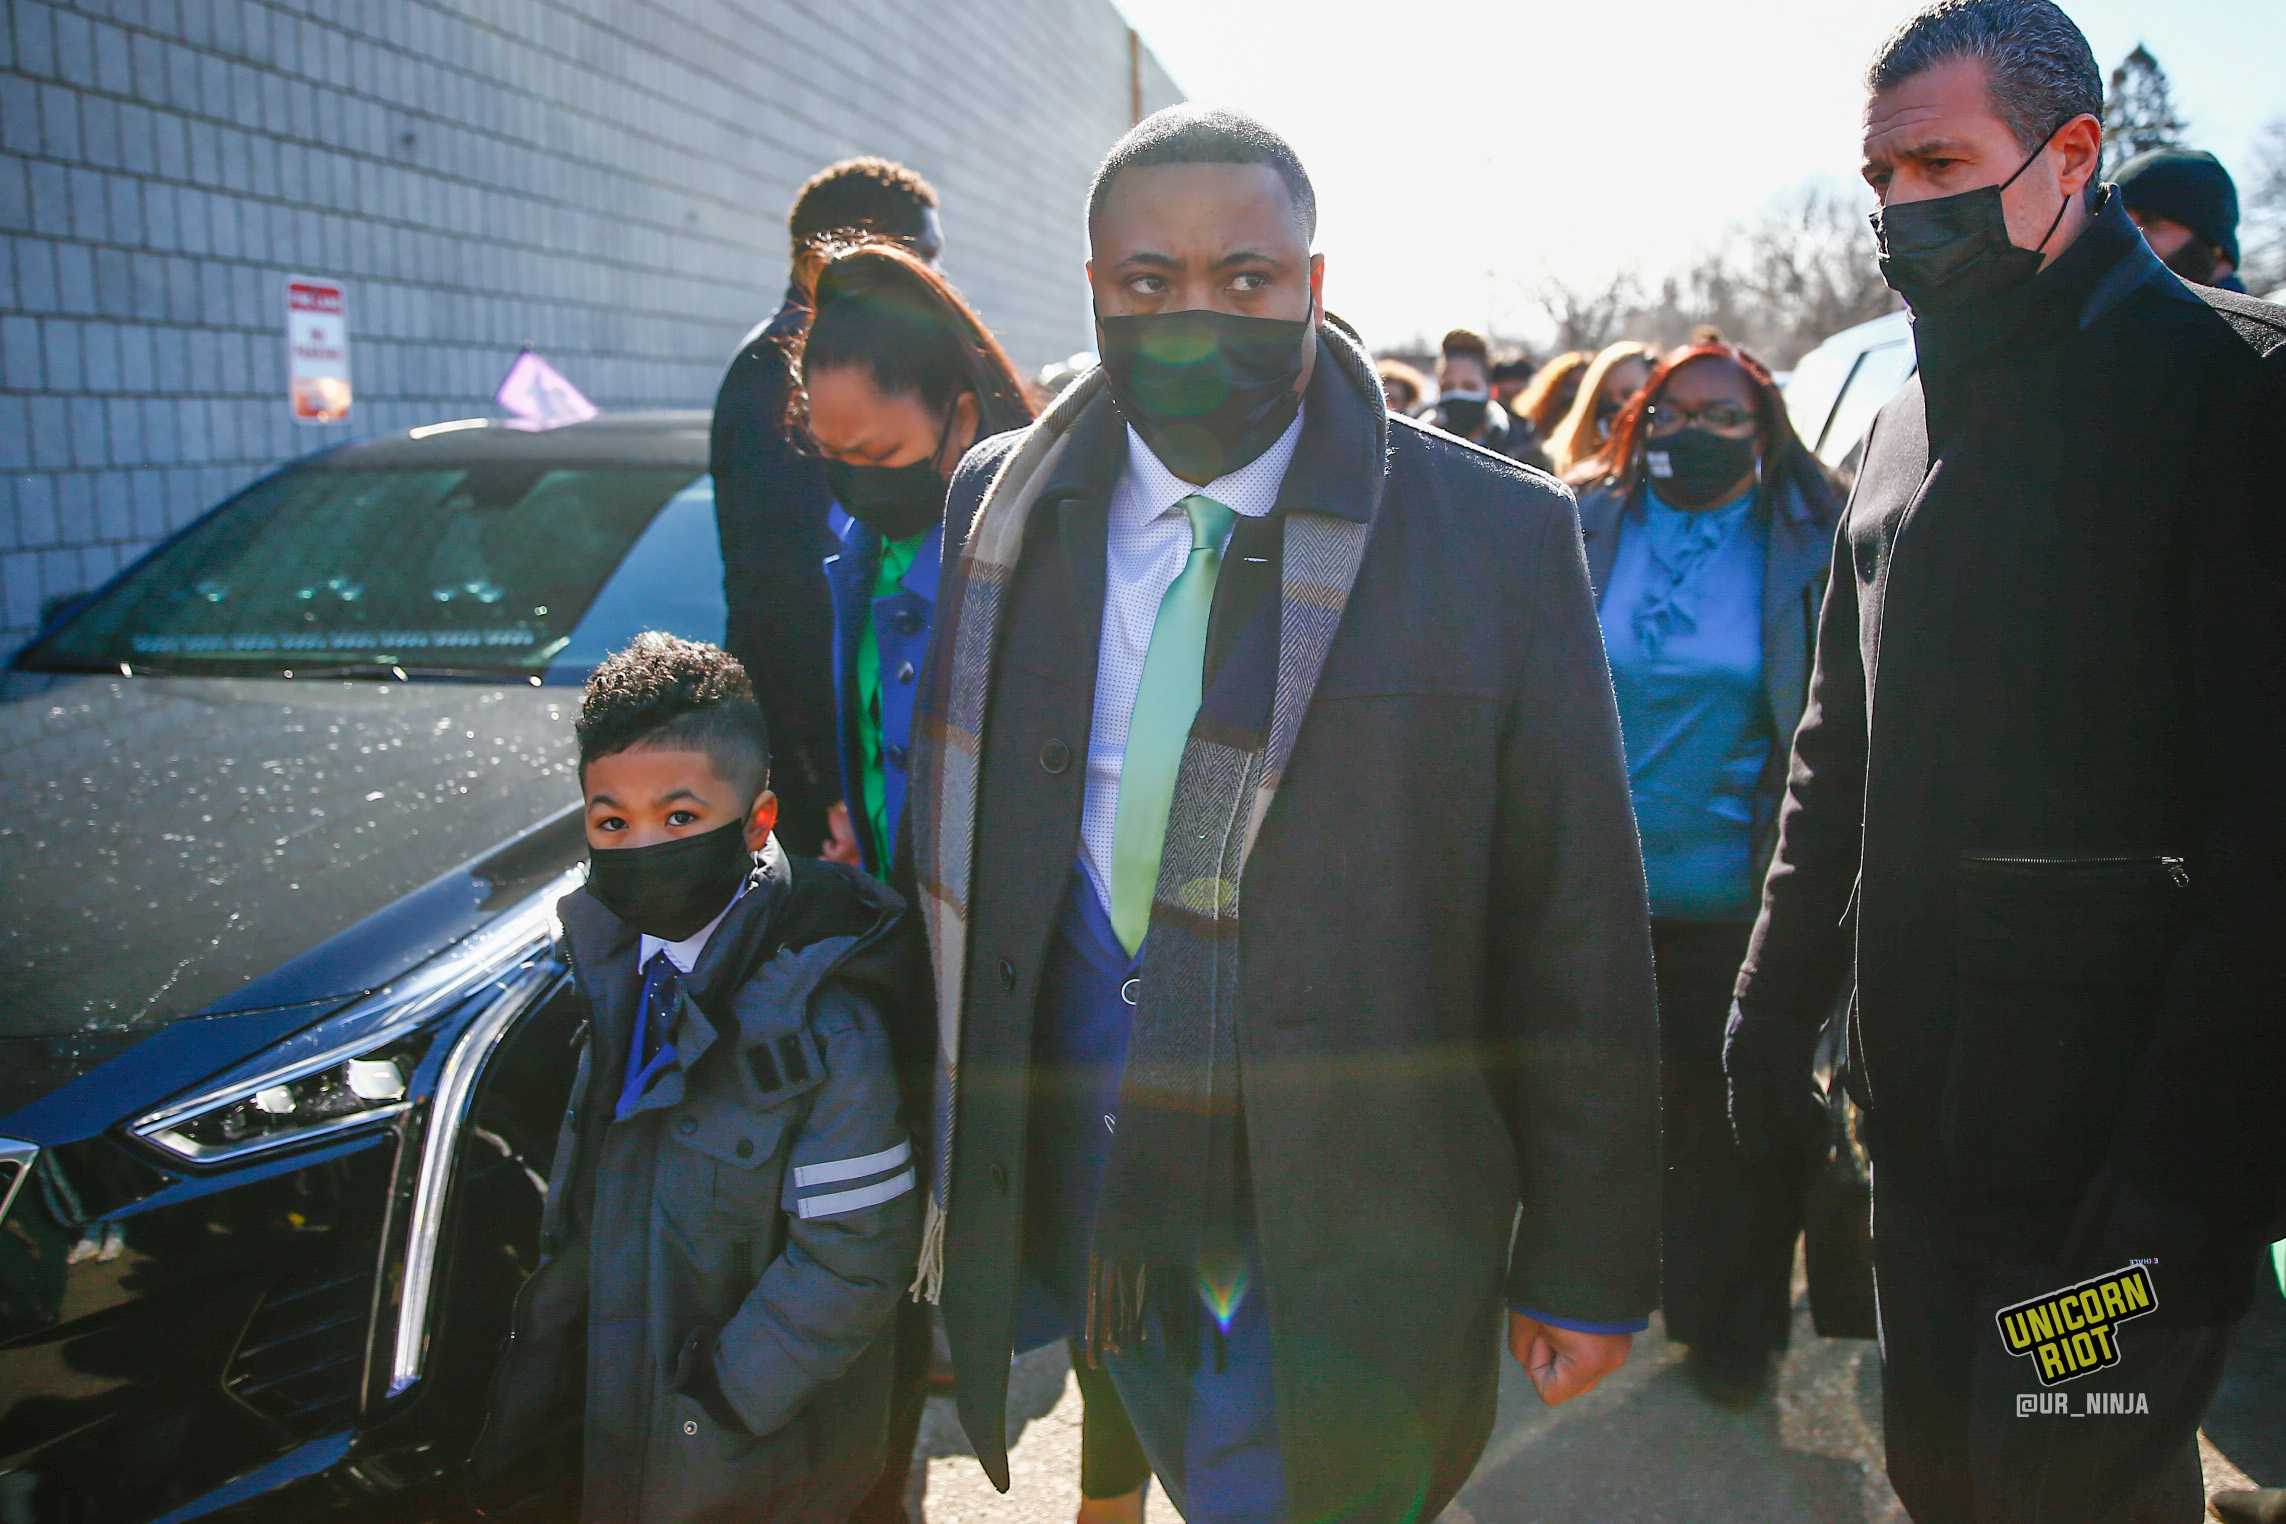 February 17, 2022, Minneapolis, MN: Andre Locke, the father of Amir Locke walks into Shiloh Temple with members of his family before the start of the funeral.